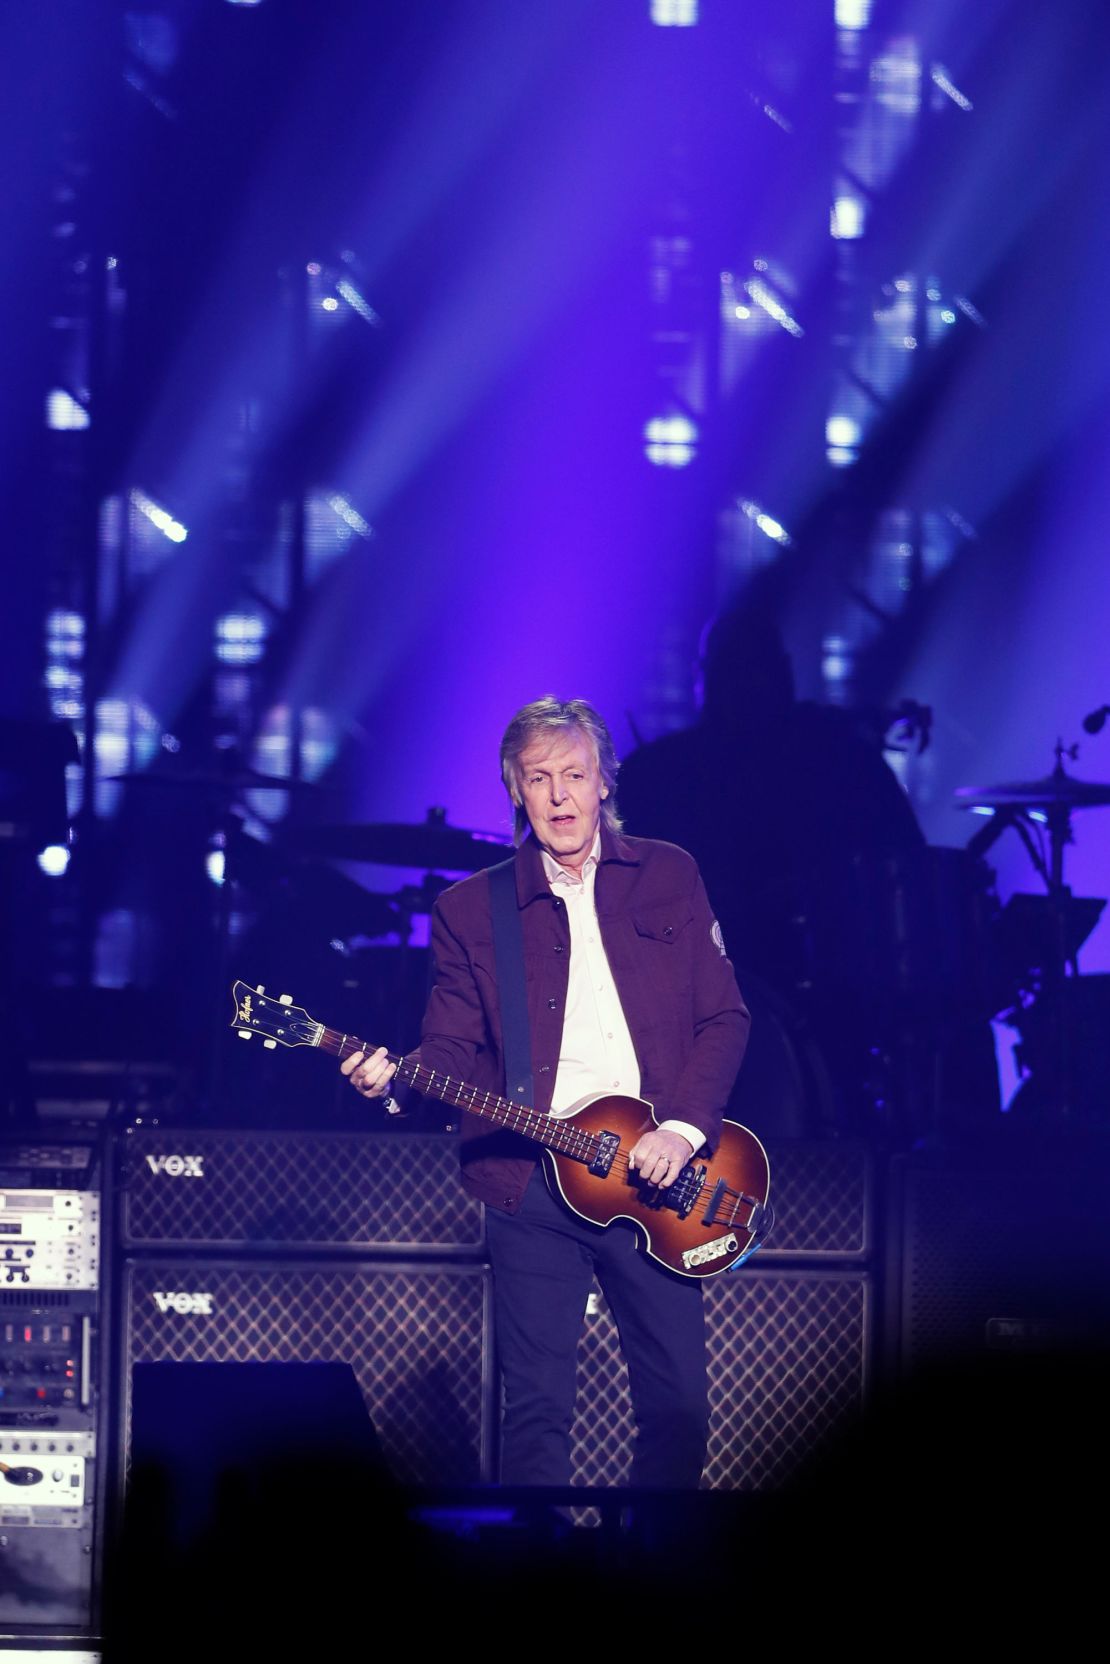 Paul McCartney plays at a concert for his Freshen Up tour at the SAP Center in San Jose, California, on Wednesday, July 10, 2019.